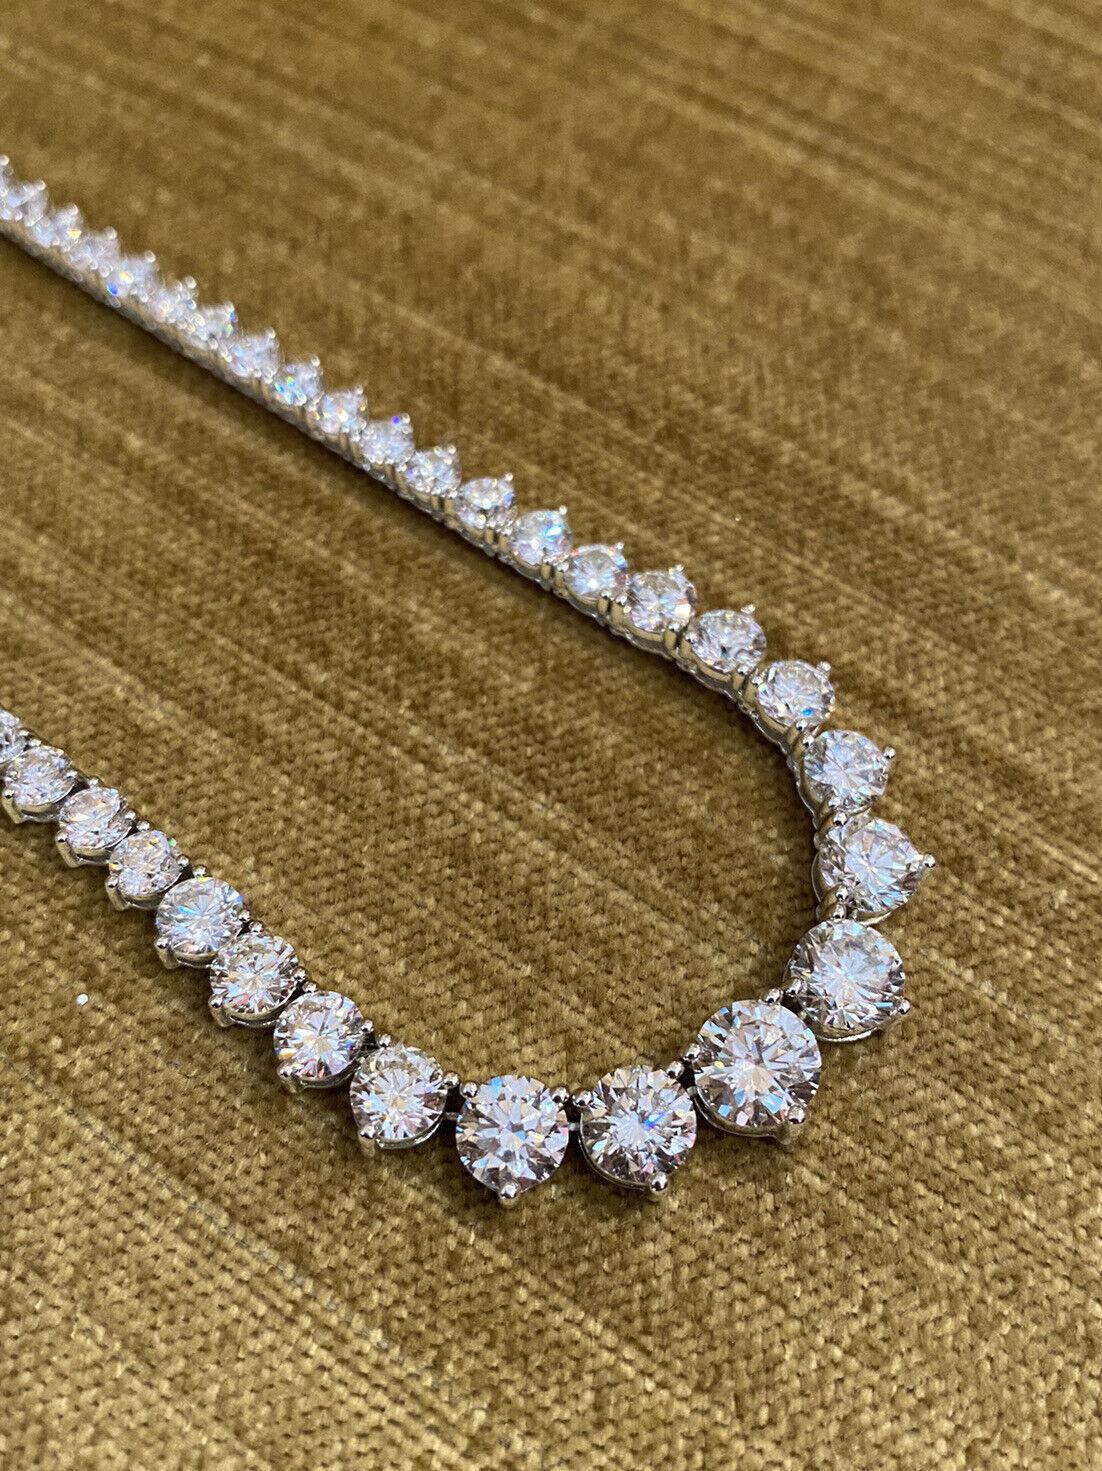 Certified Graduated Diamond Riviera Tennis Necklace 21.26 Carats Total Weight in 18k White Gold

Graduated Diamond Necklace features 88 Round Brilliant Diamonds Graduating in size prong set in 18k White Gold. The four largest diamonds come with